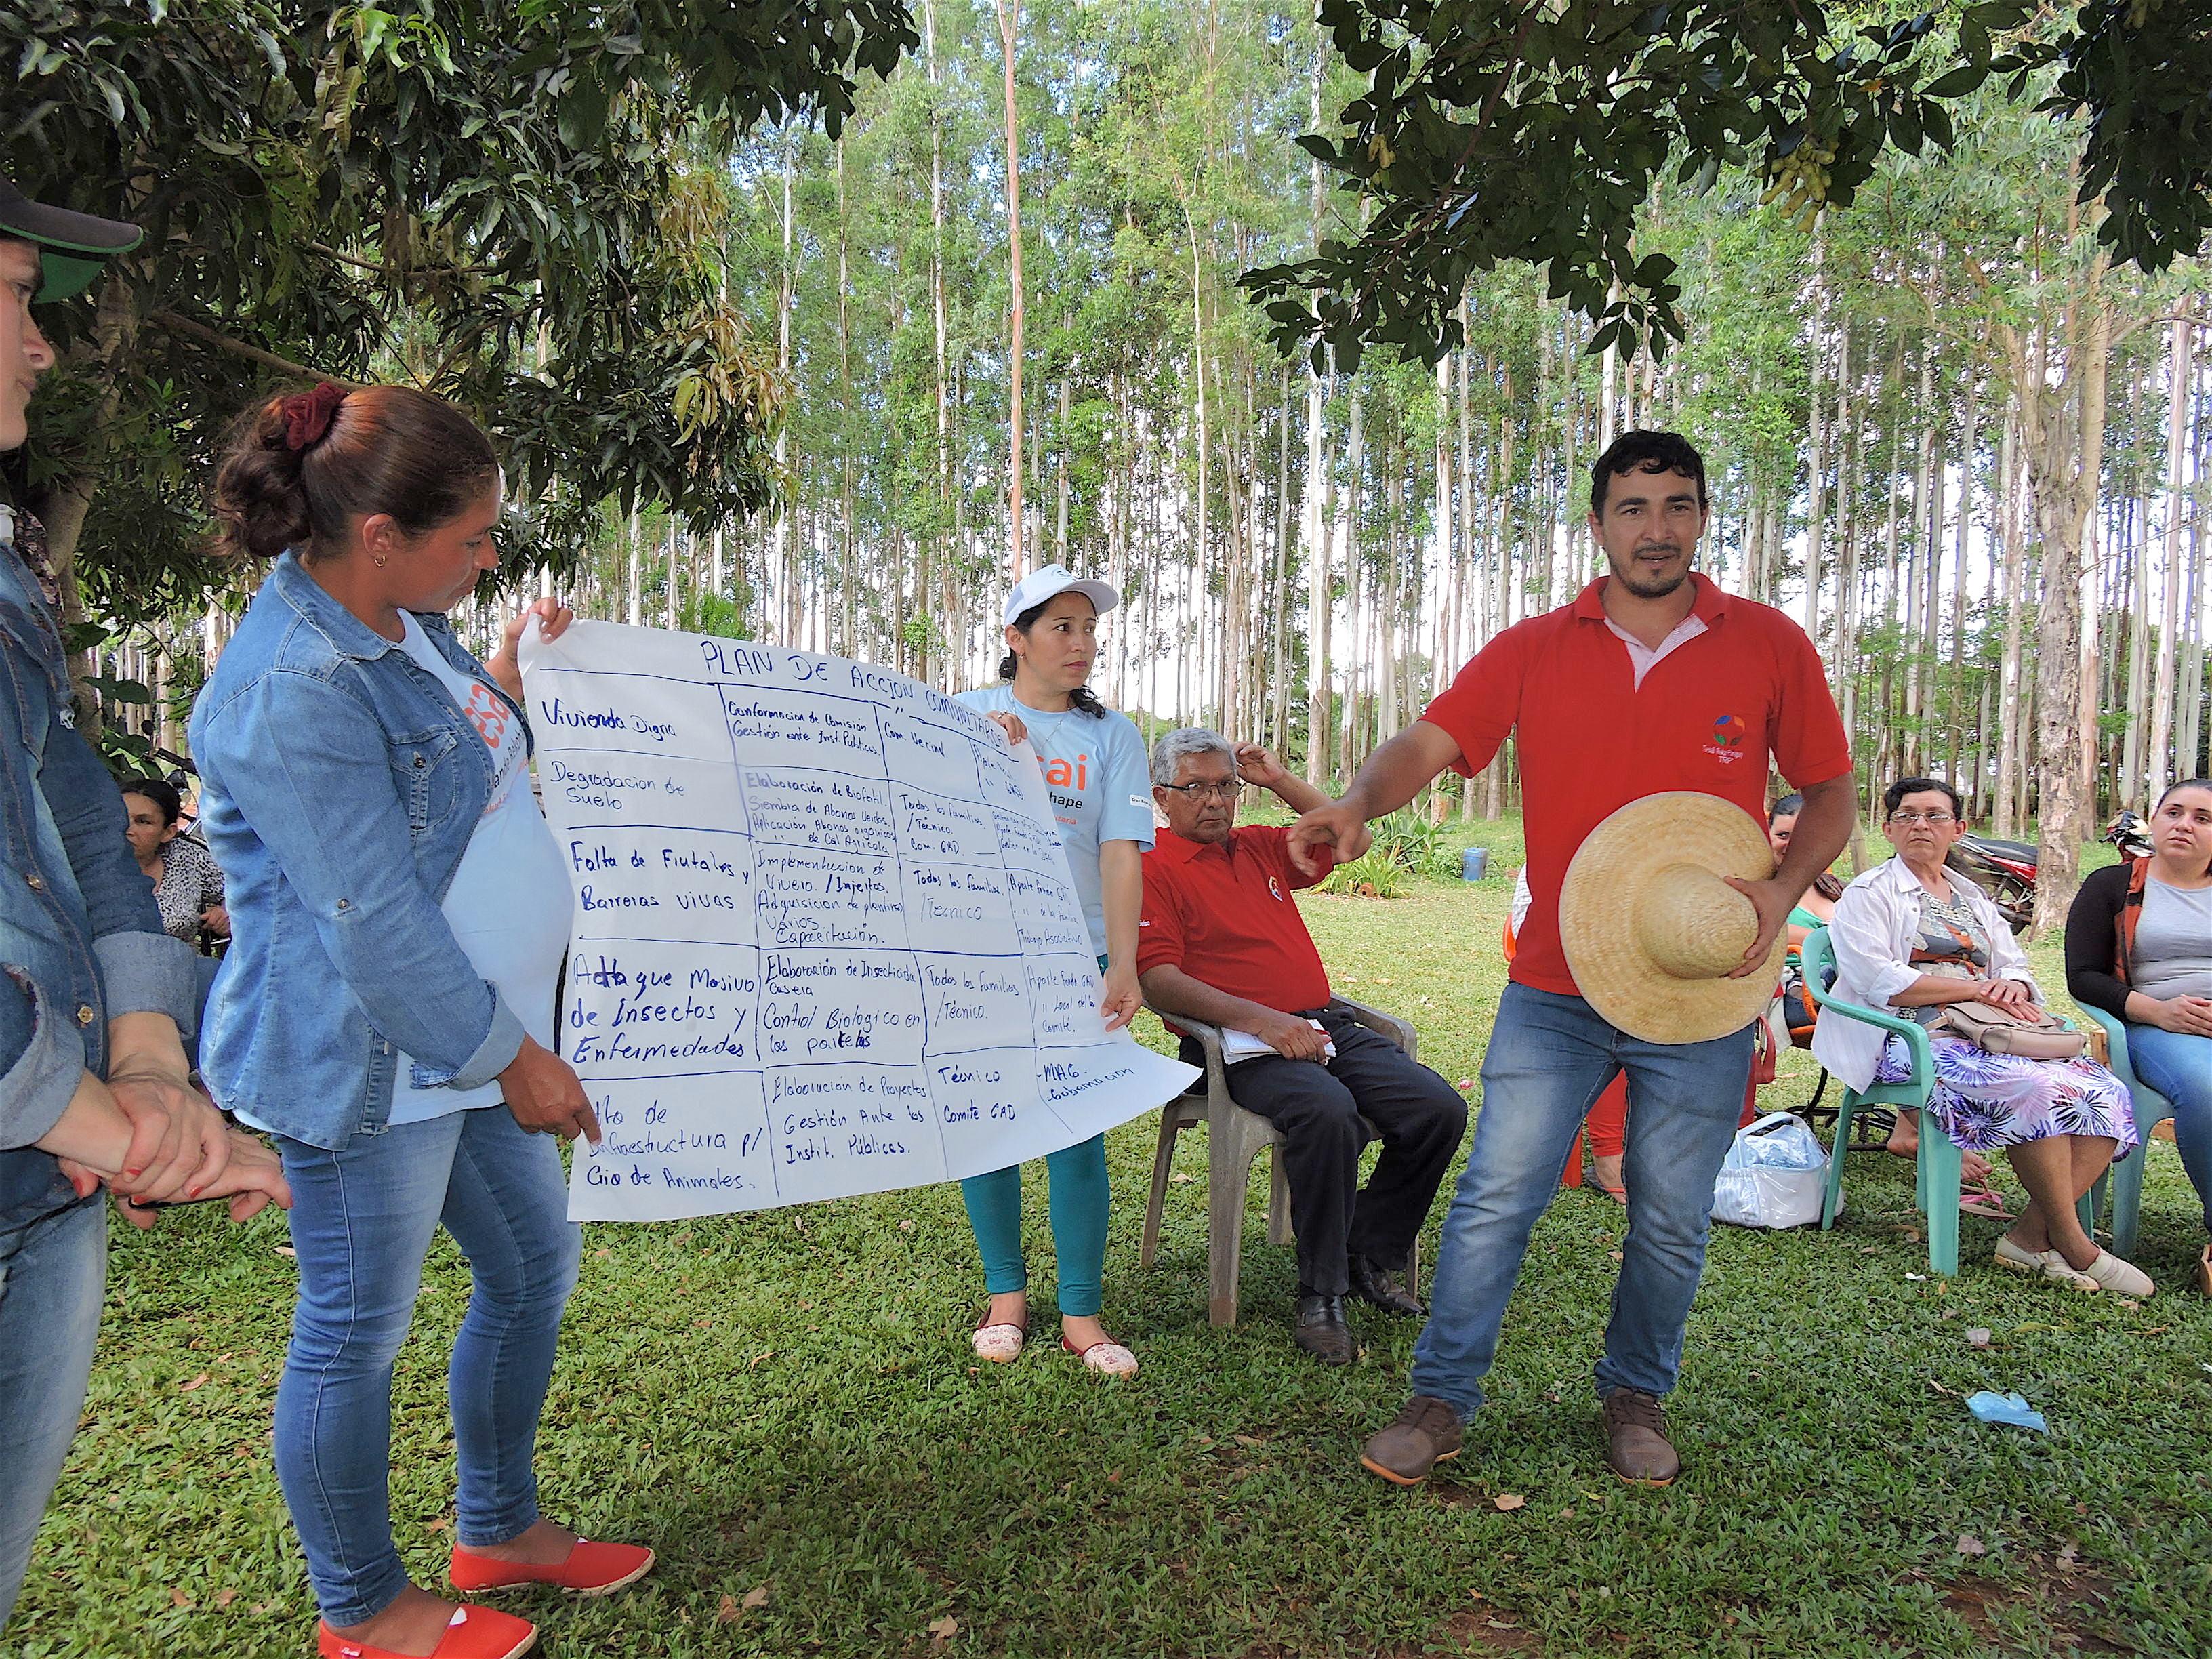 A man and two women are standing in a park. They hold up an inscribed poster and explain its contents to the community.